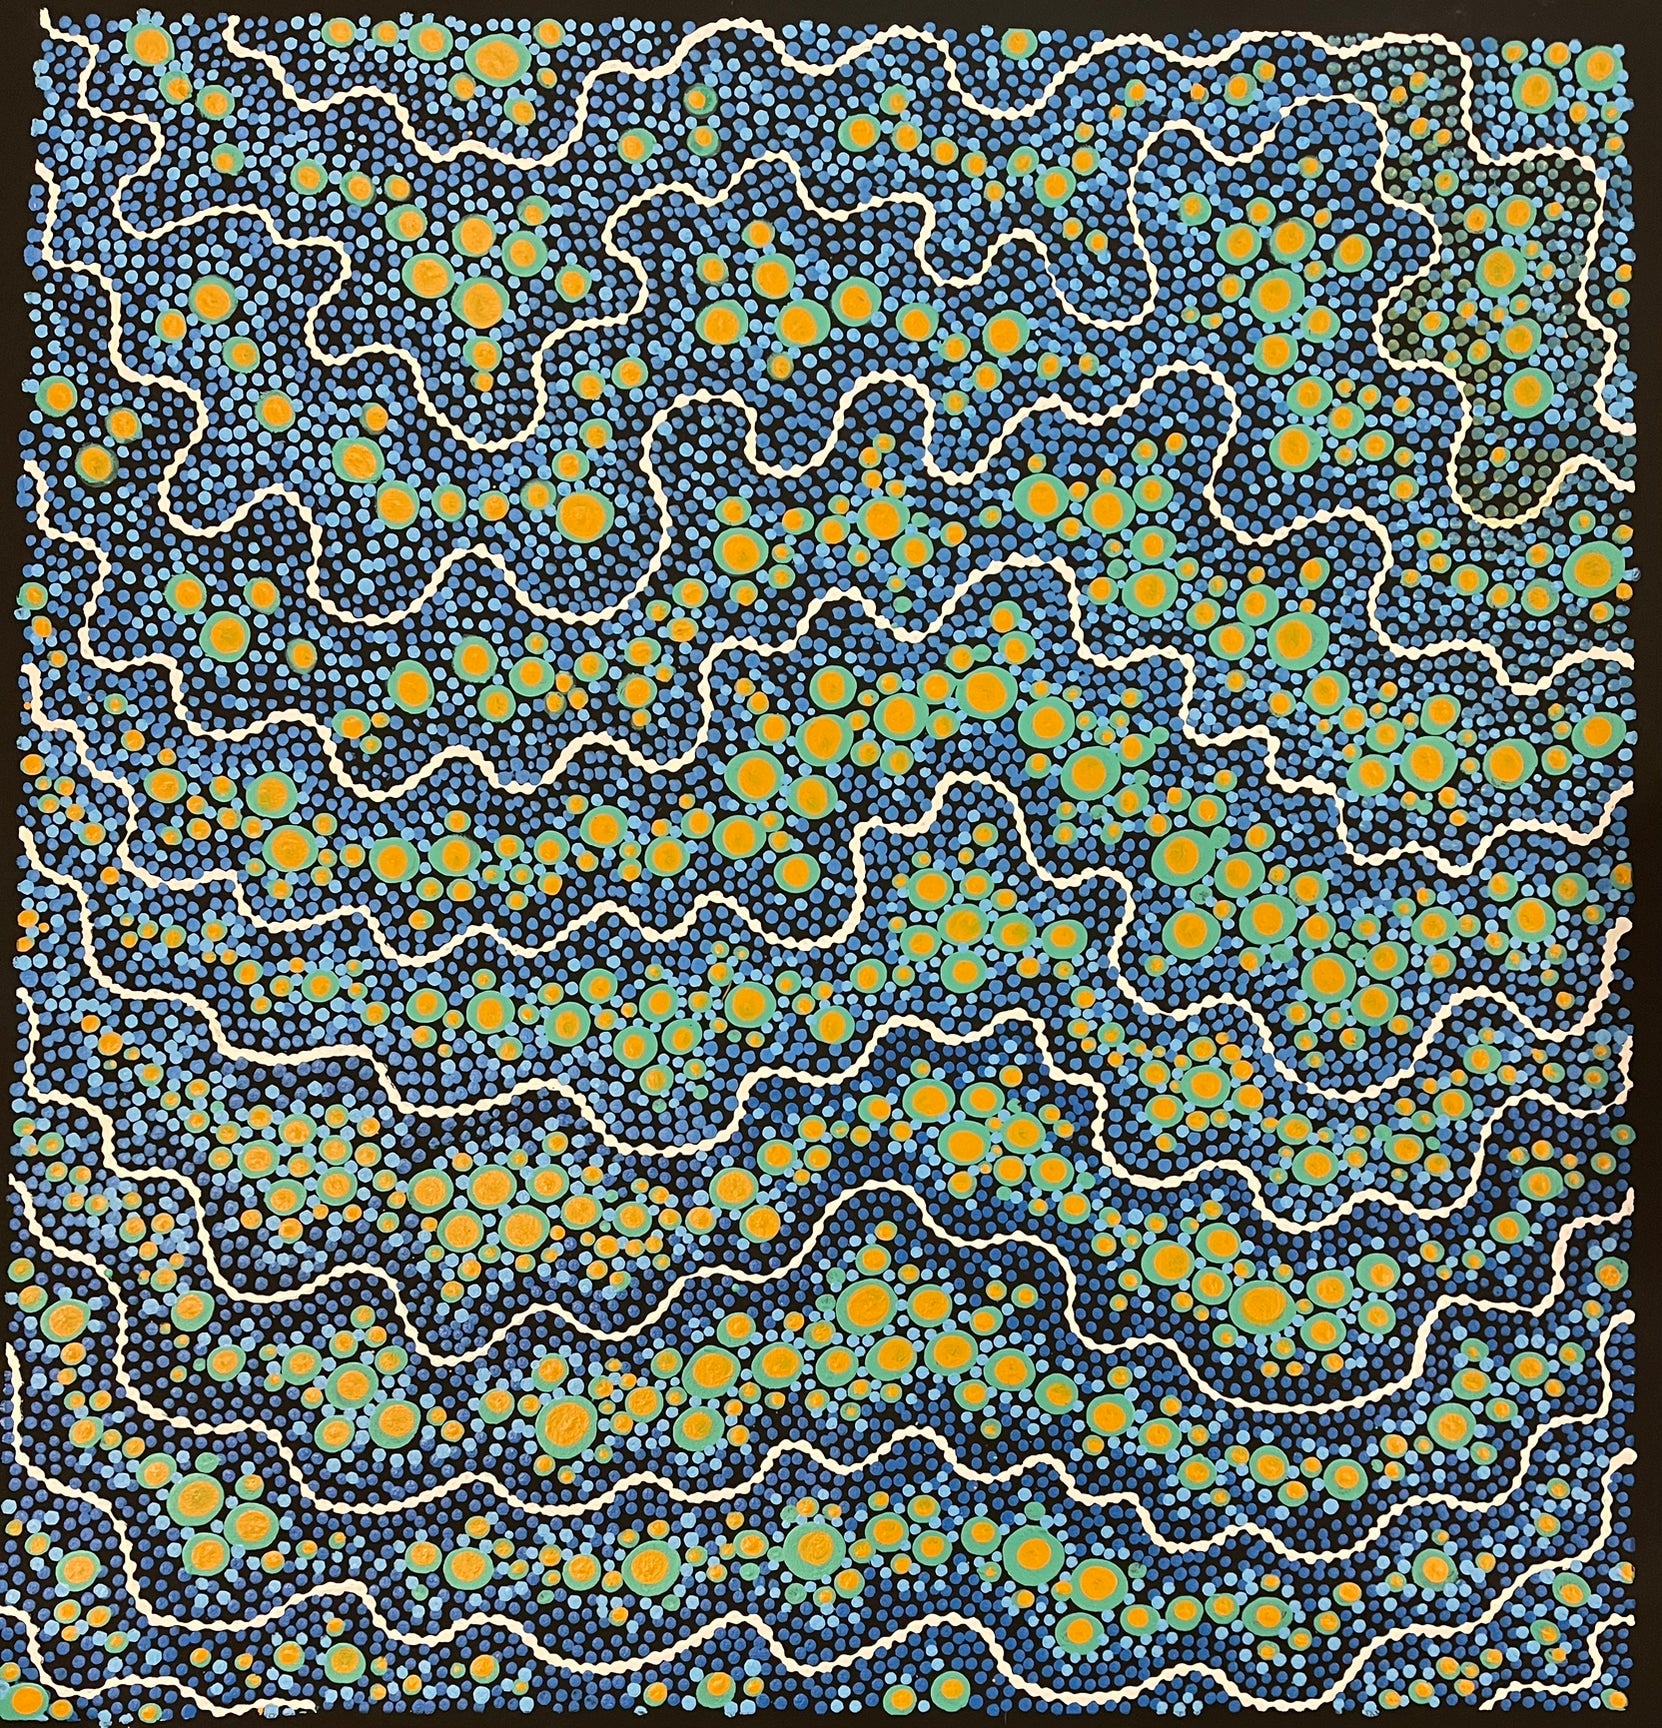 Trephina Sultan - Arial View, Running Water, Rocky River Beds - 91x86cm